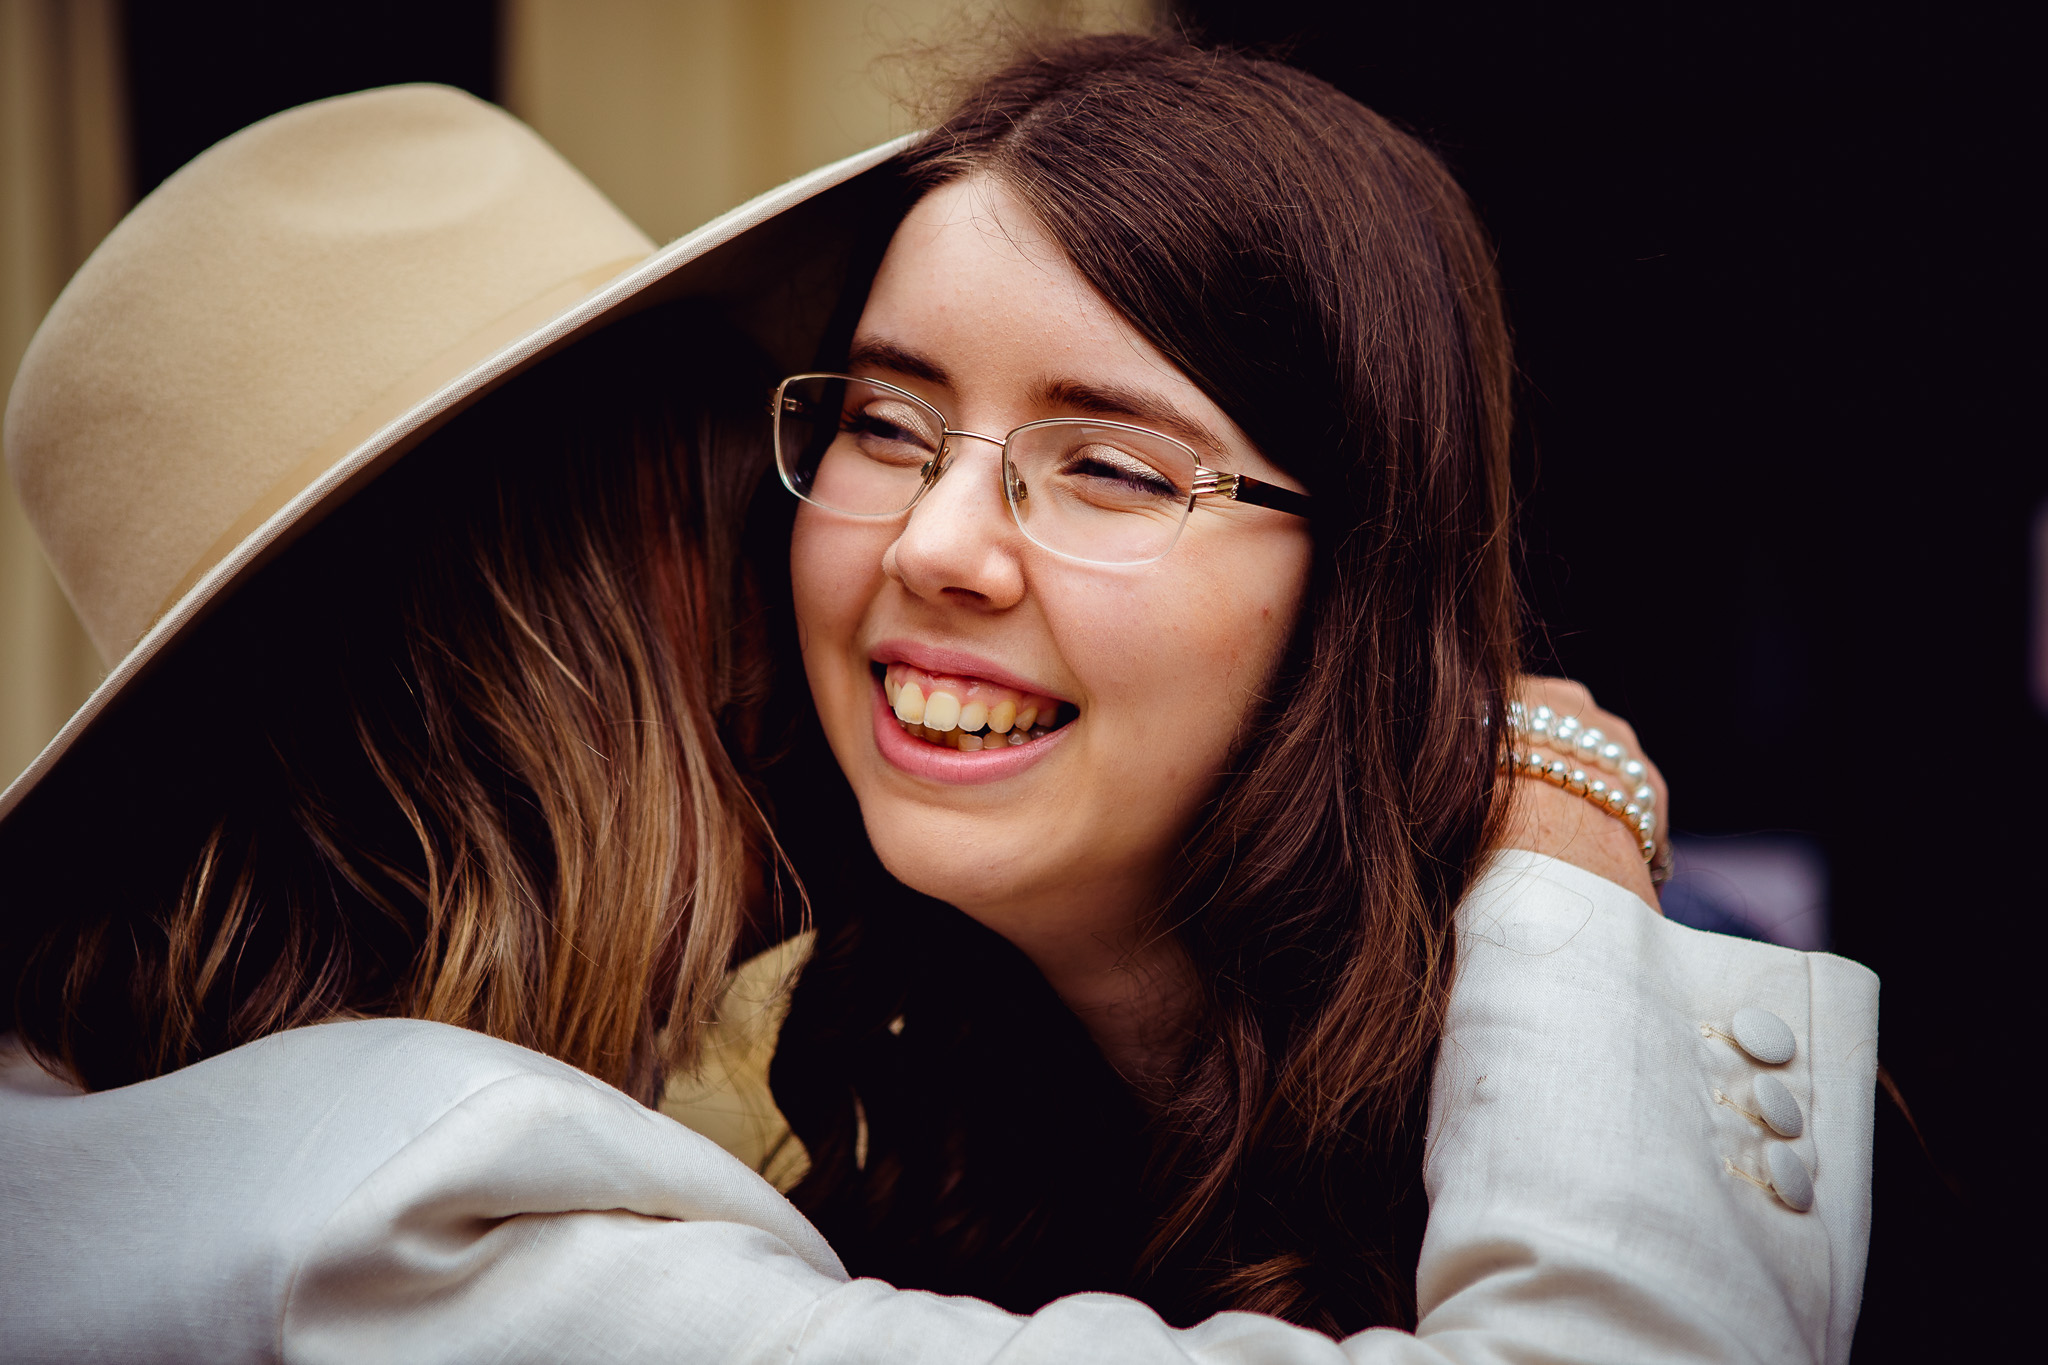 The girl smiles as she is hugged and greeted by the bride who's wearing a fedora.